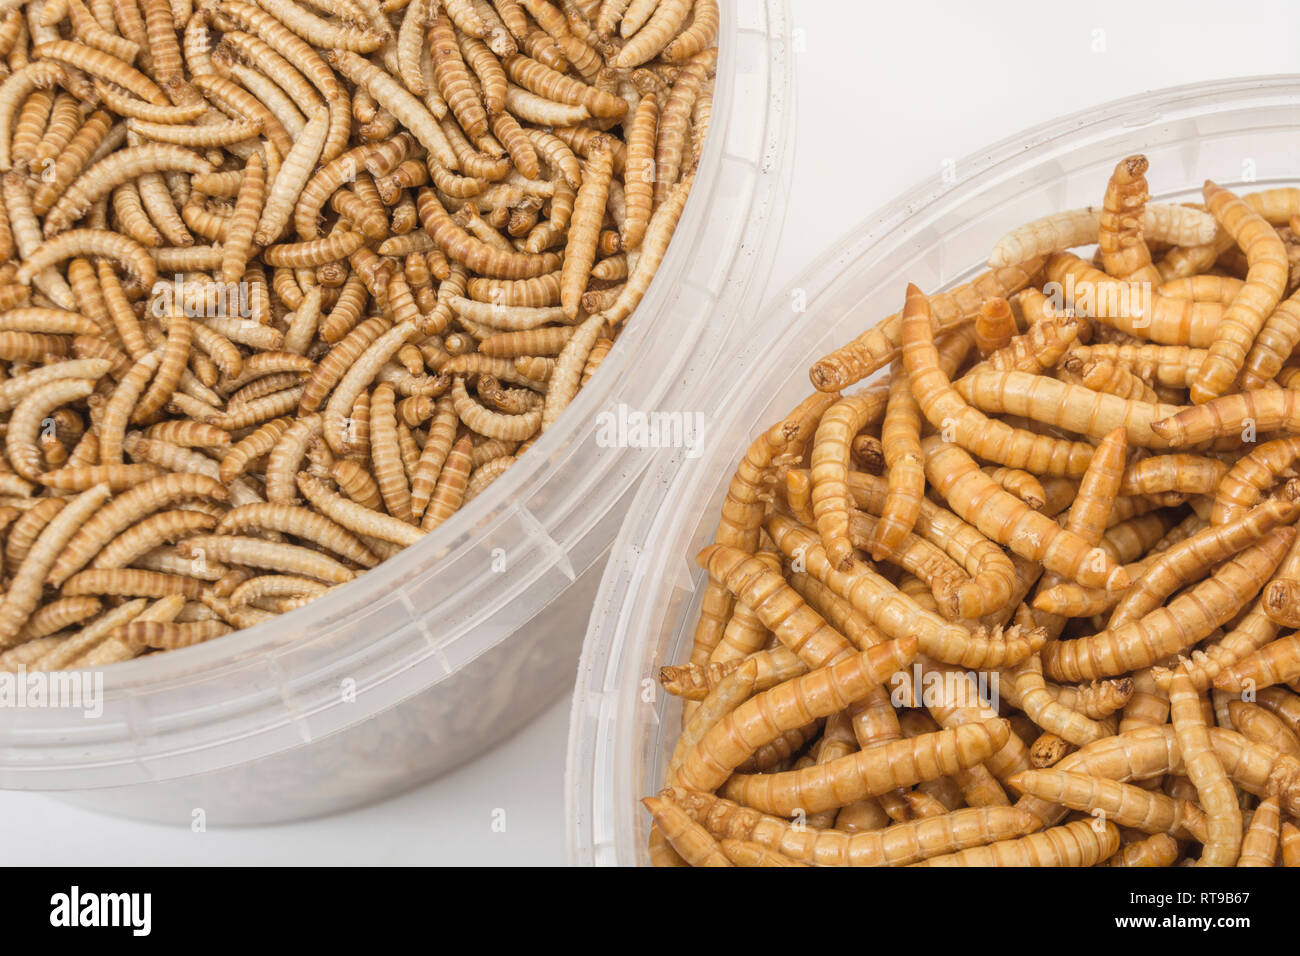 Edible Mealworms / Tenebrio molitor (R) & smaller Buffalo worms /  Alphitobius diaperinus (L). Metaphor eating bugs, eating insects,  Entomophagy Stock Photo - Alamy